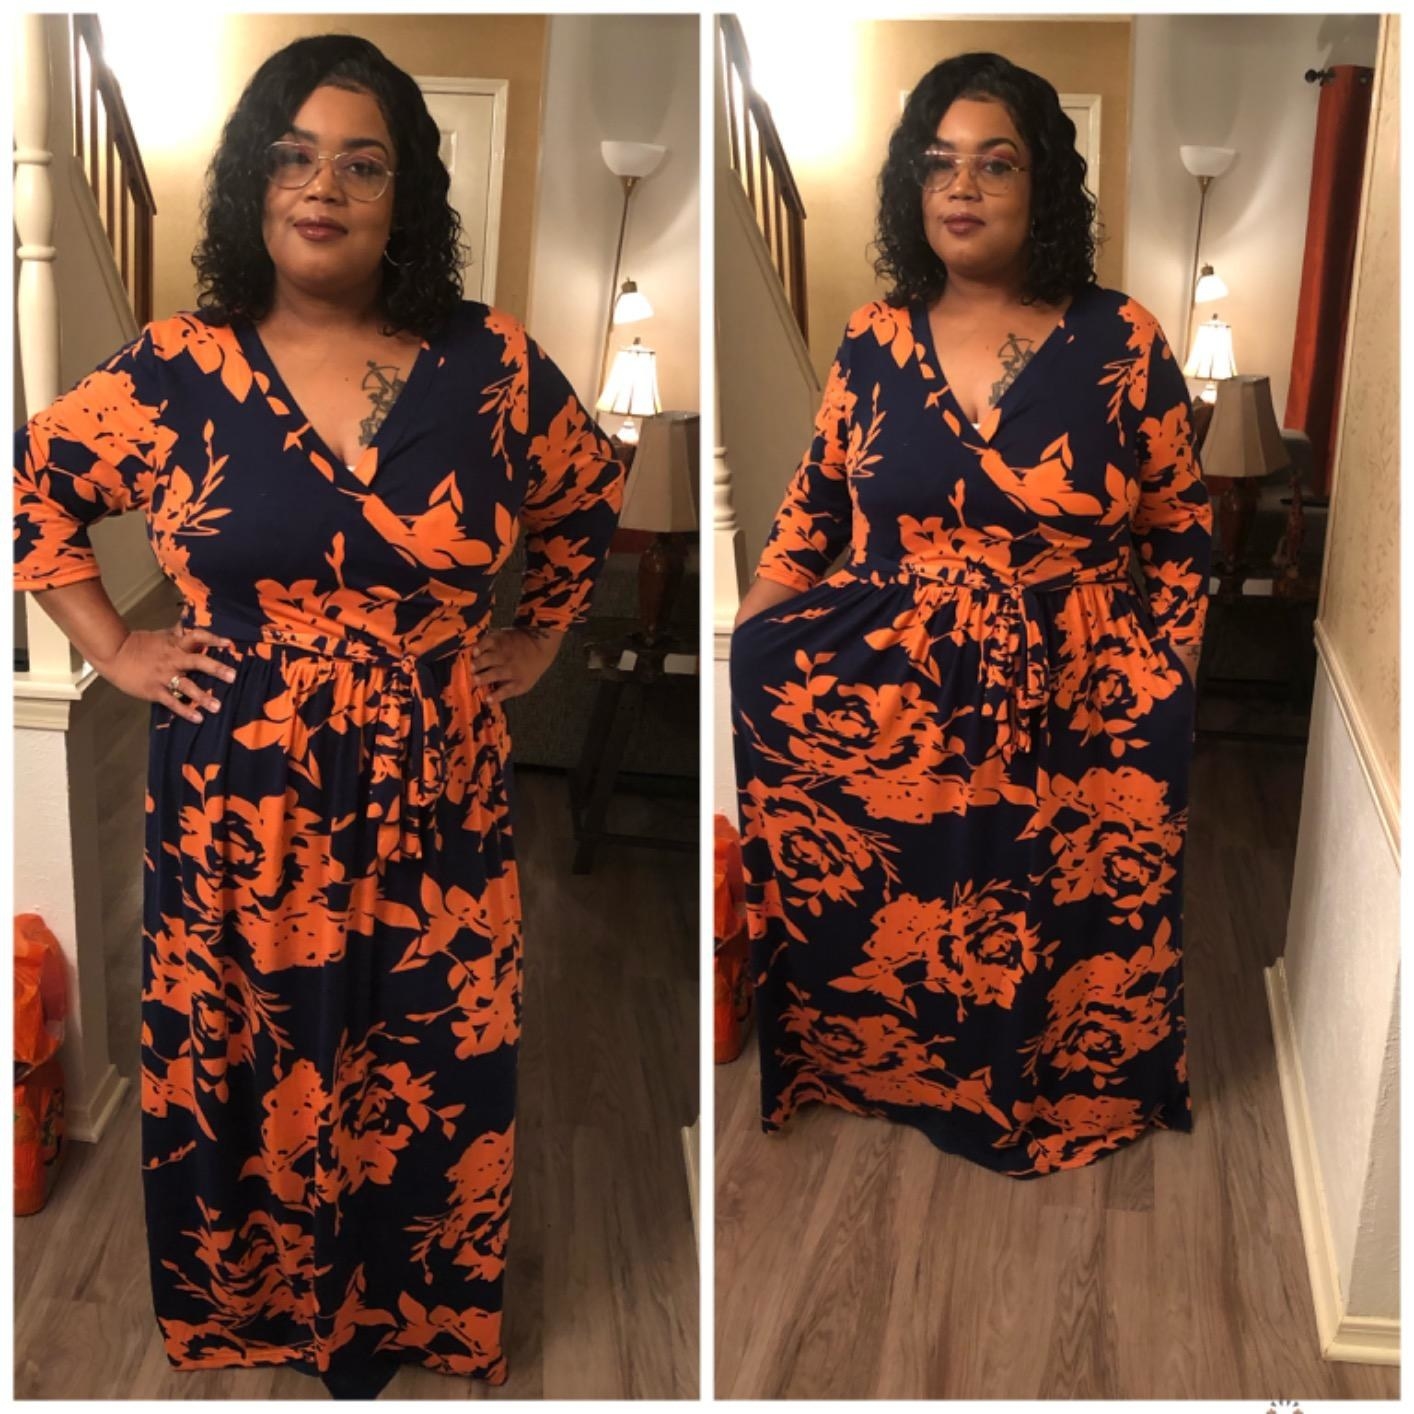 A reviewer photo of the dress in orange and black